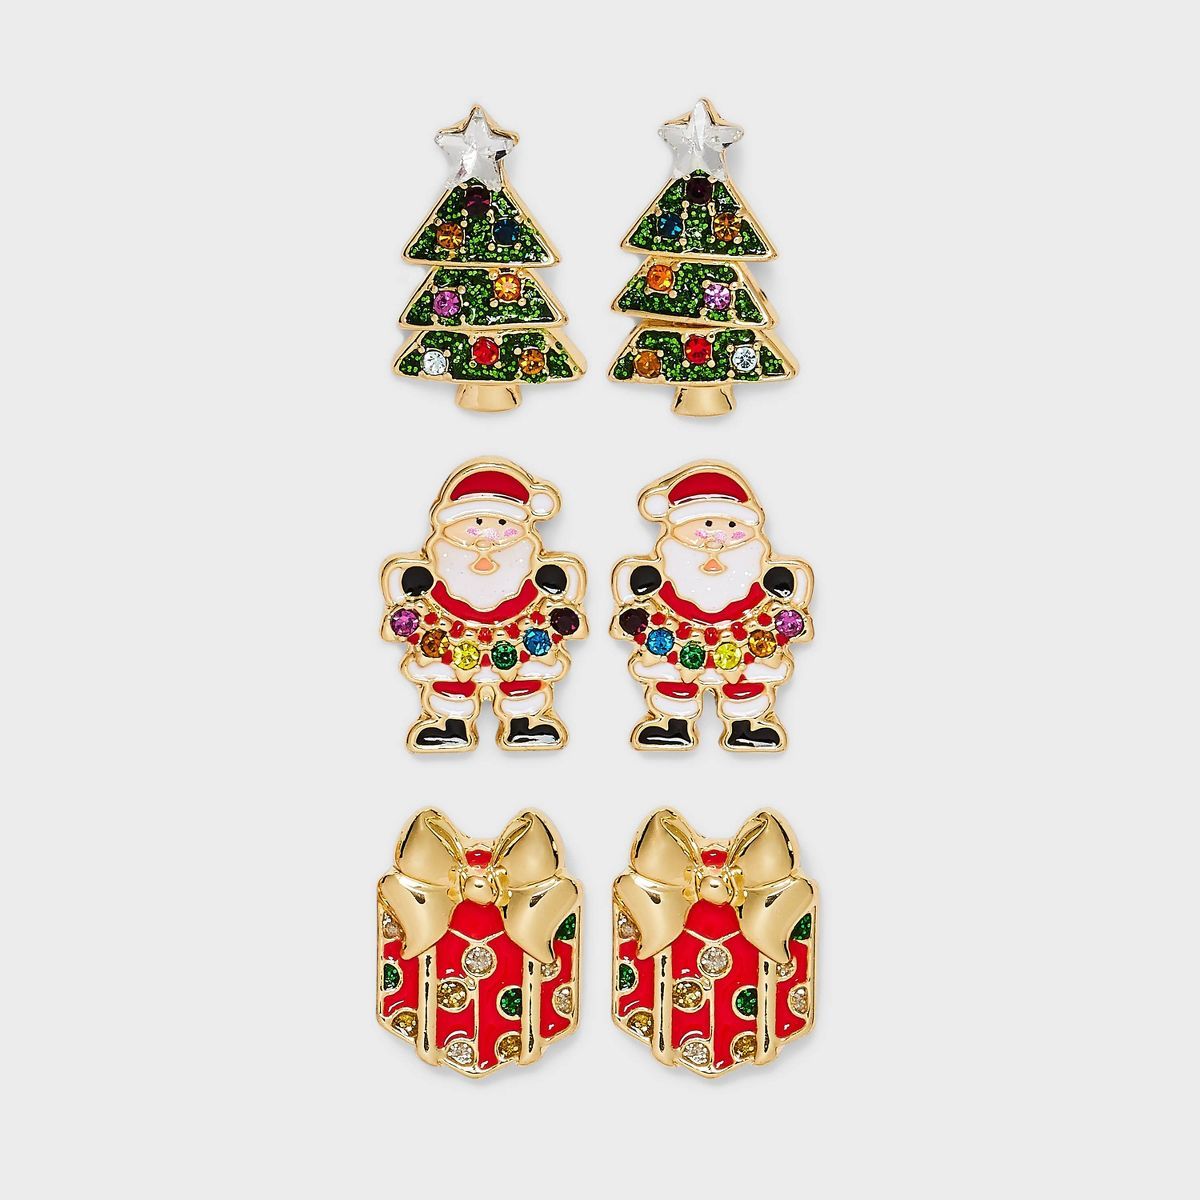 SUGARFIX by BaubleBar "Holly Jolly" Stud Earring Set 3pc | Target